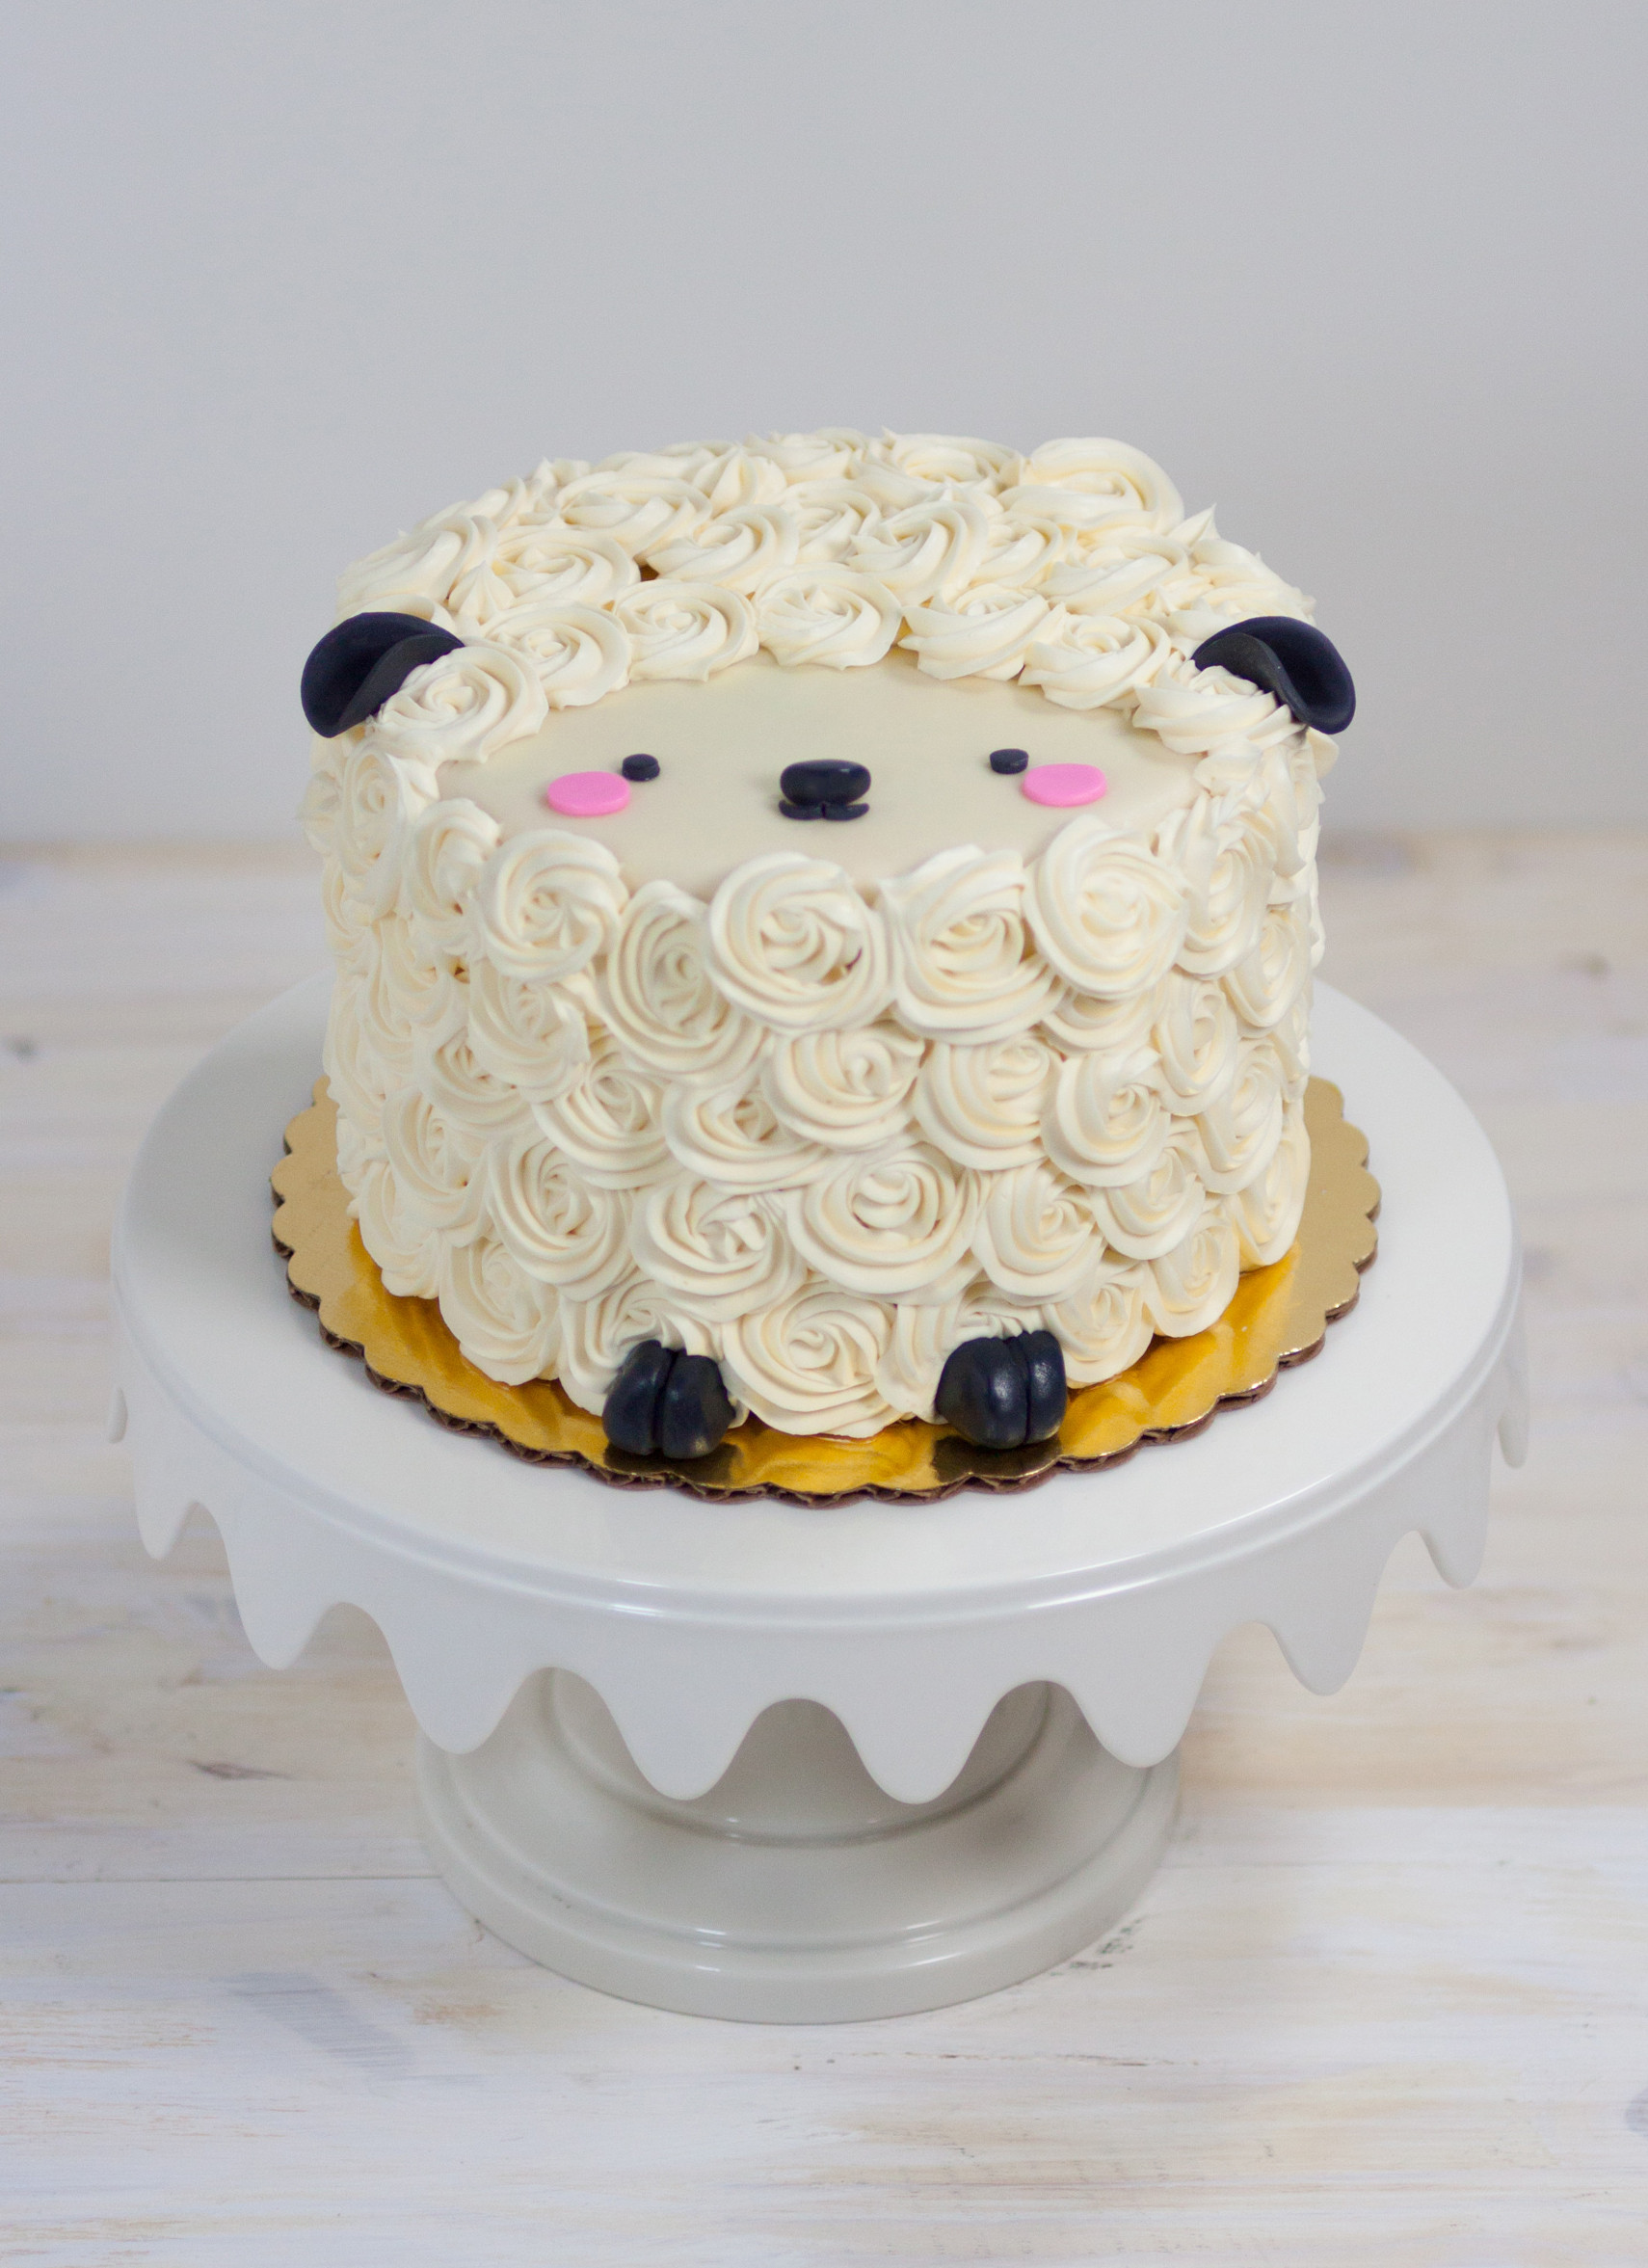 Cute Birthday Cake Ideas
 Lois the Lamb Mini cake by Whipped Bakeshop